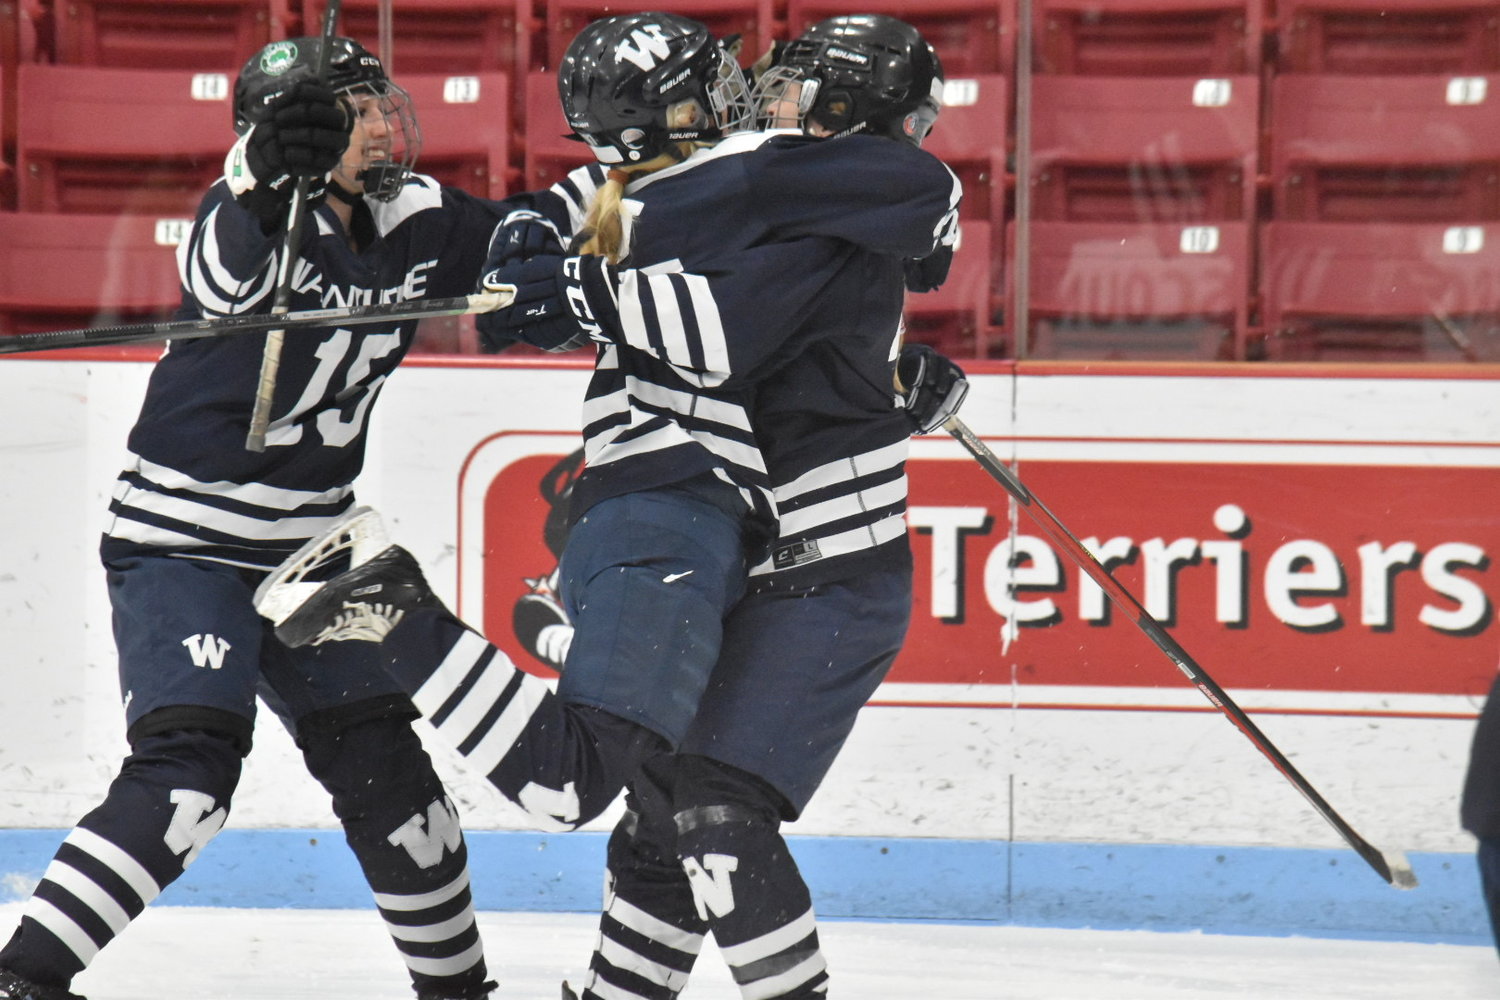 From left, Mia Beaudette, Bailey Lower and Mayson Lower celebrate Mayson's third period goal.